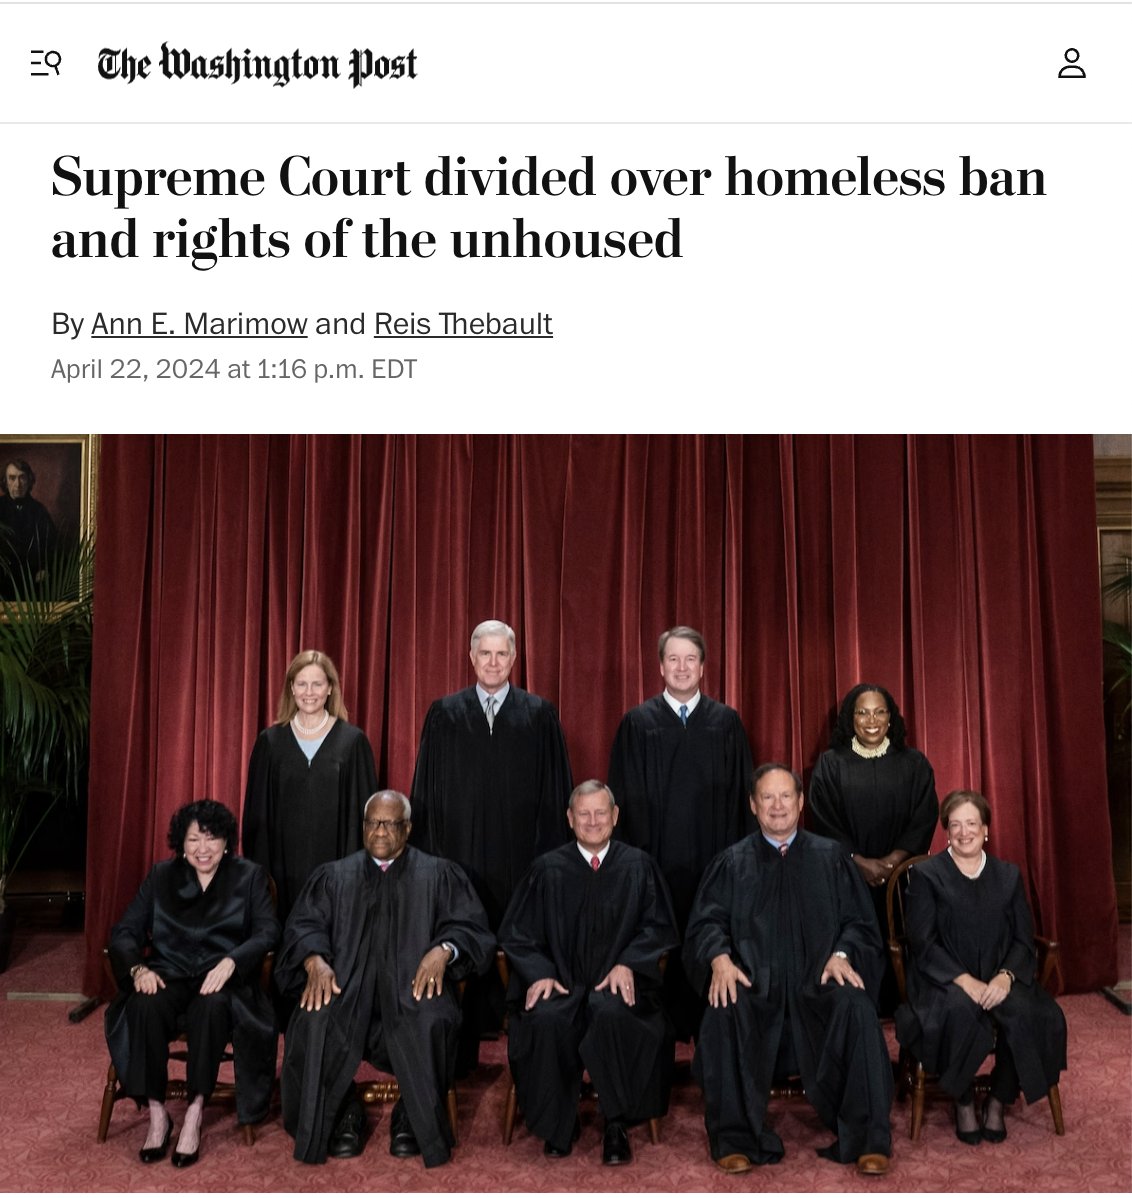 'Supreme Court justices expressed concern about punishing homeless people for sleeping outside when they have nowhere else to go while also struggling w/how to ensure local and state leaders have the flexibility to deal with the growing number of unhoused individuals nationwide.'